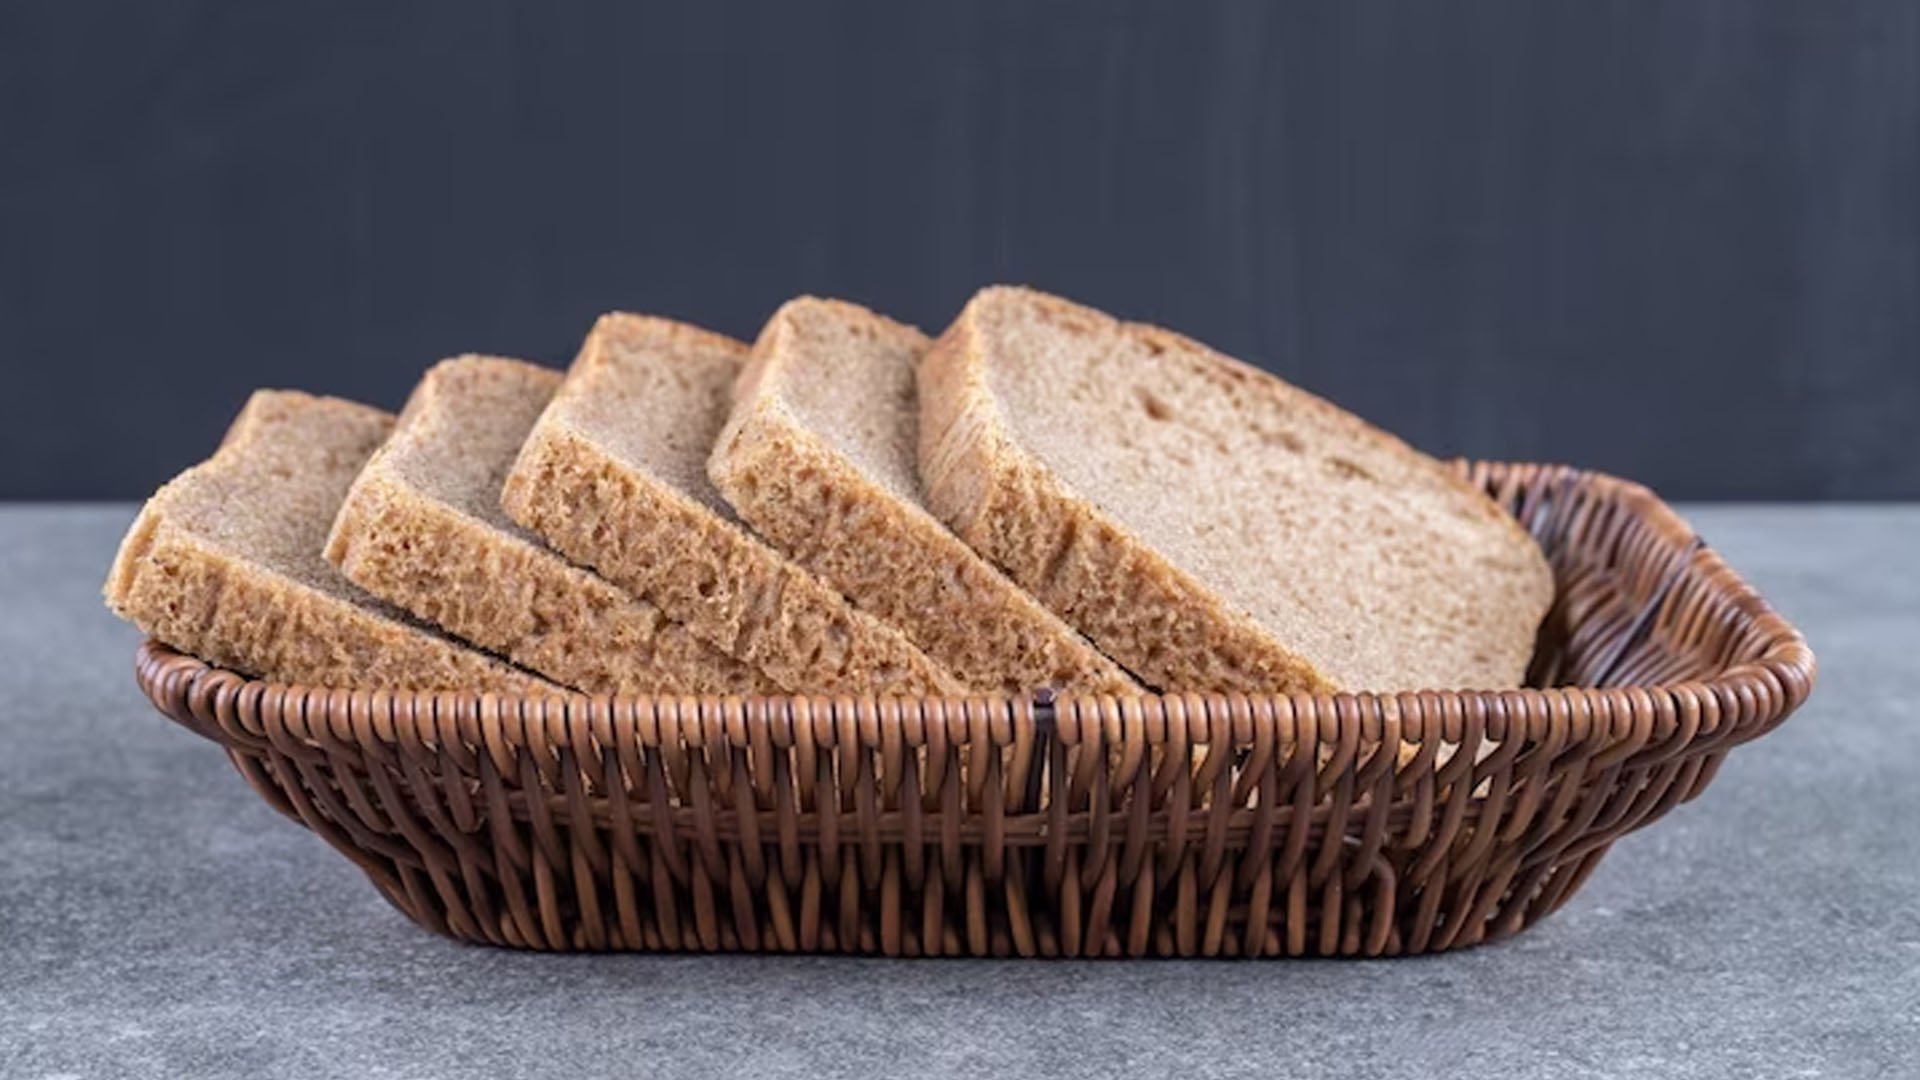 Is Wheat Bread Good For Health At Nights?